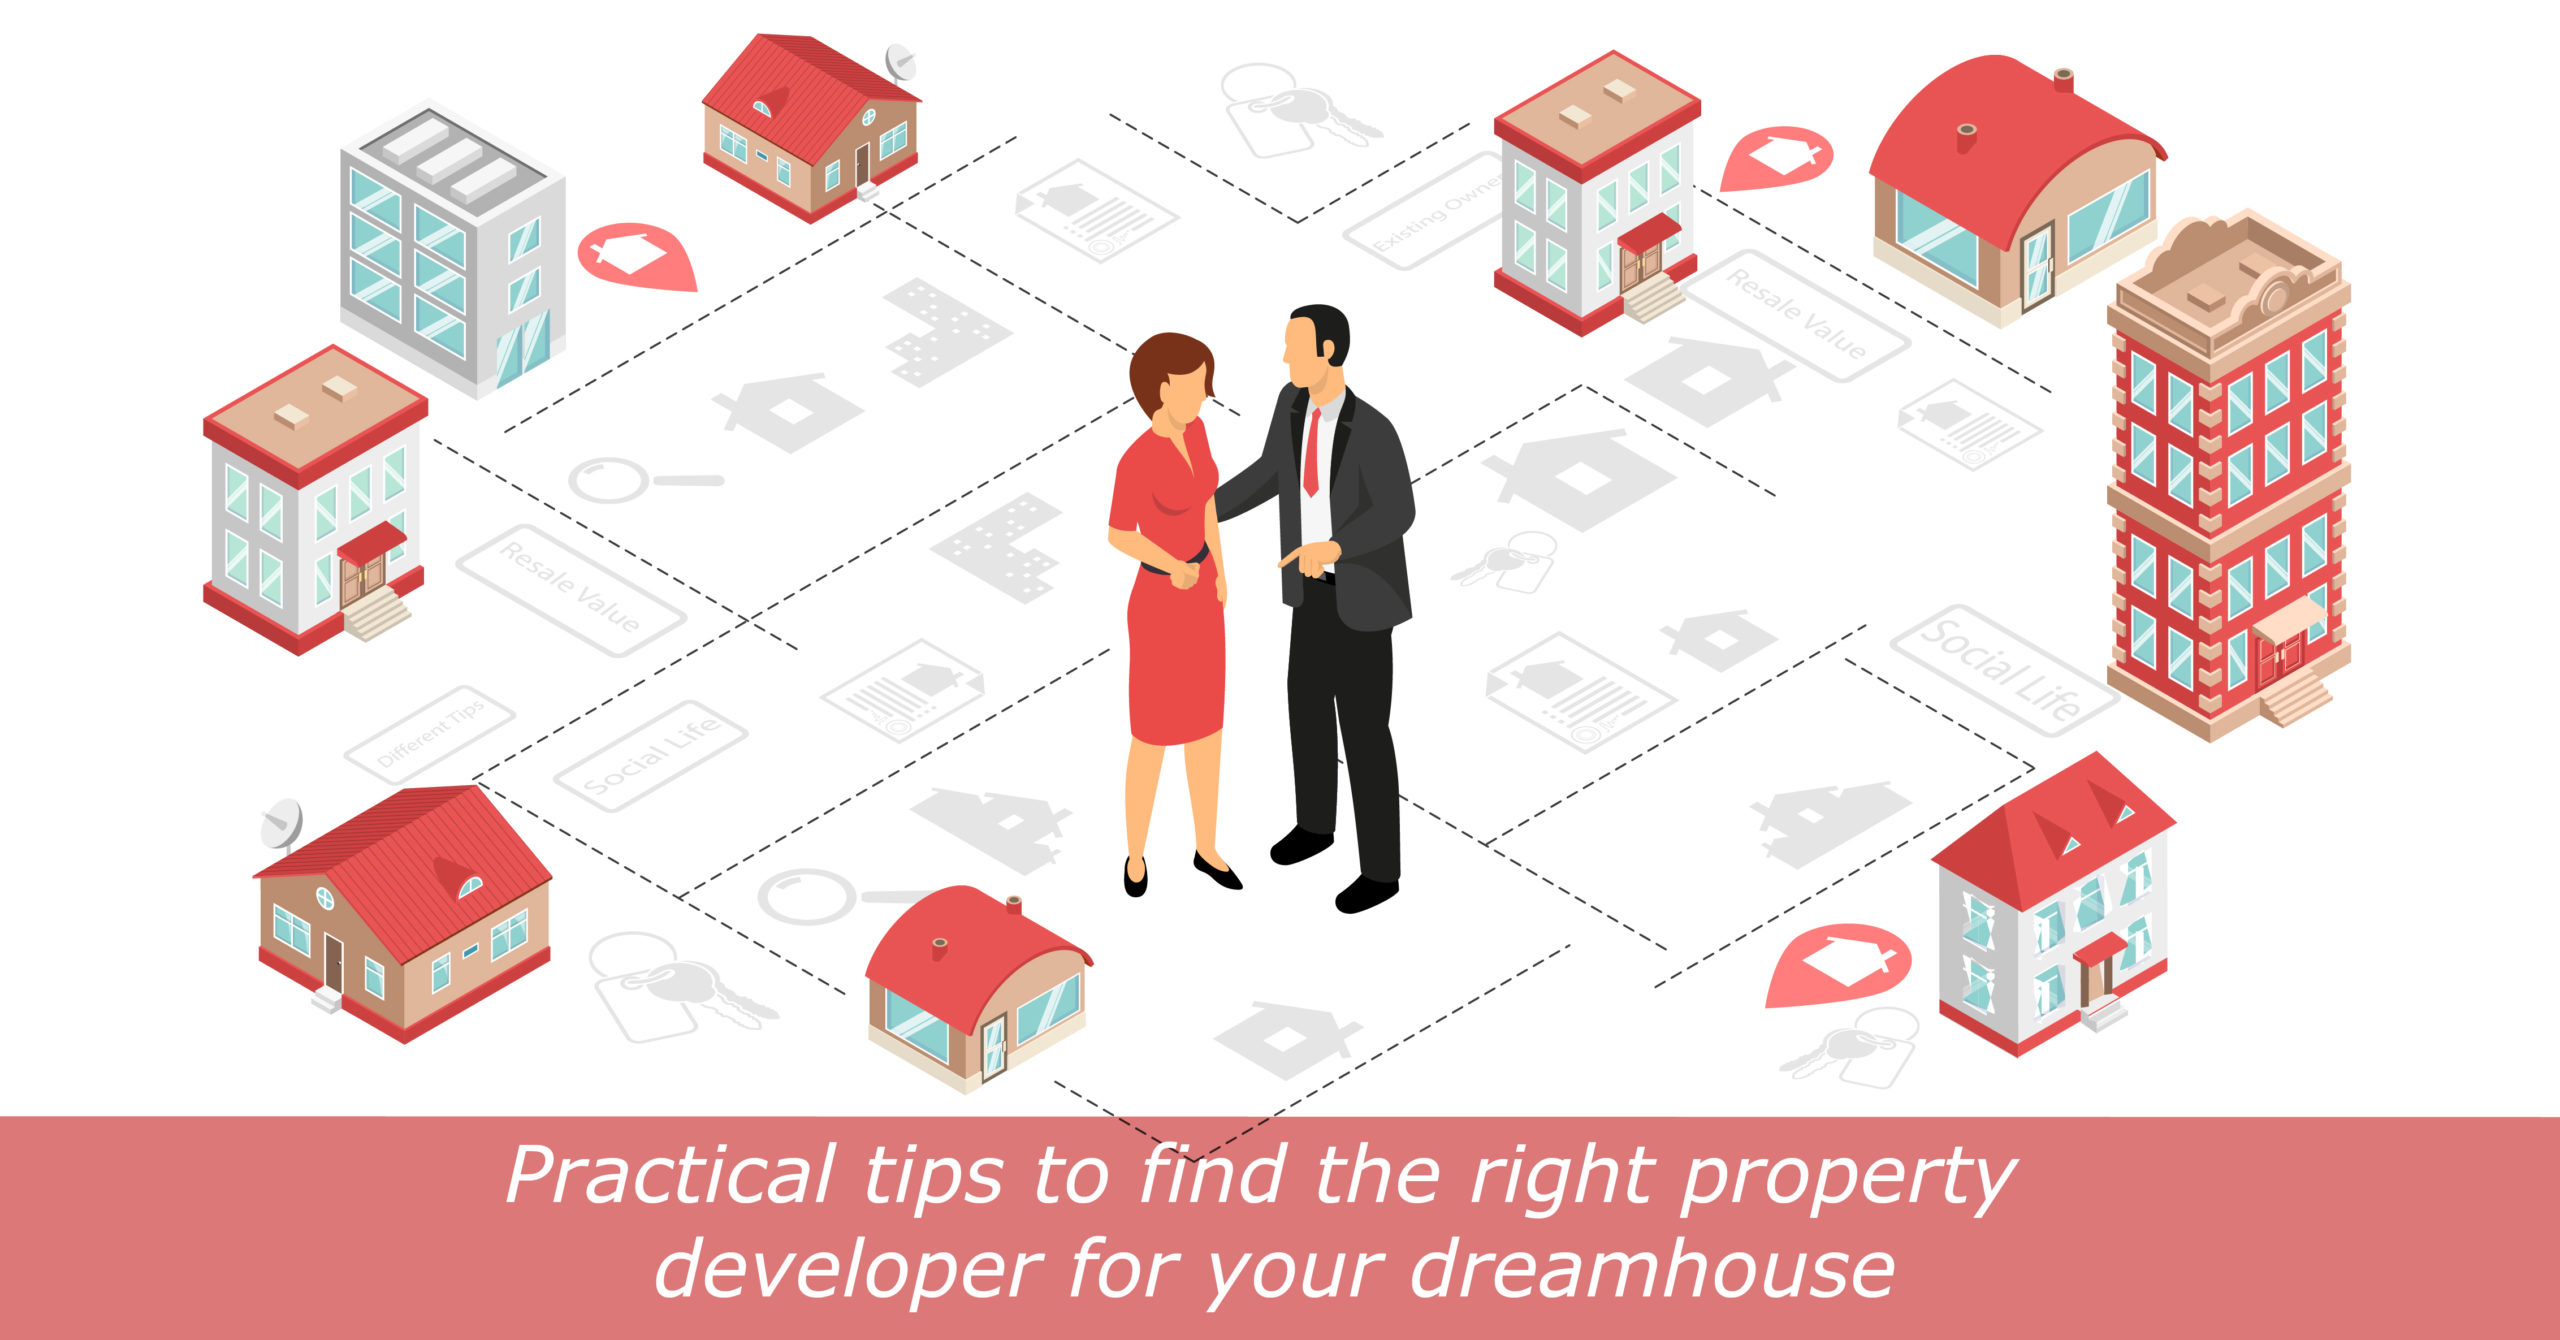 Practical tips to find the right property developer for your dreamhouse